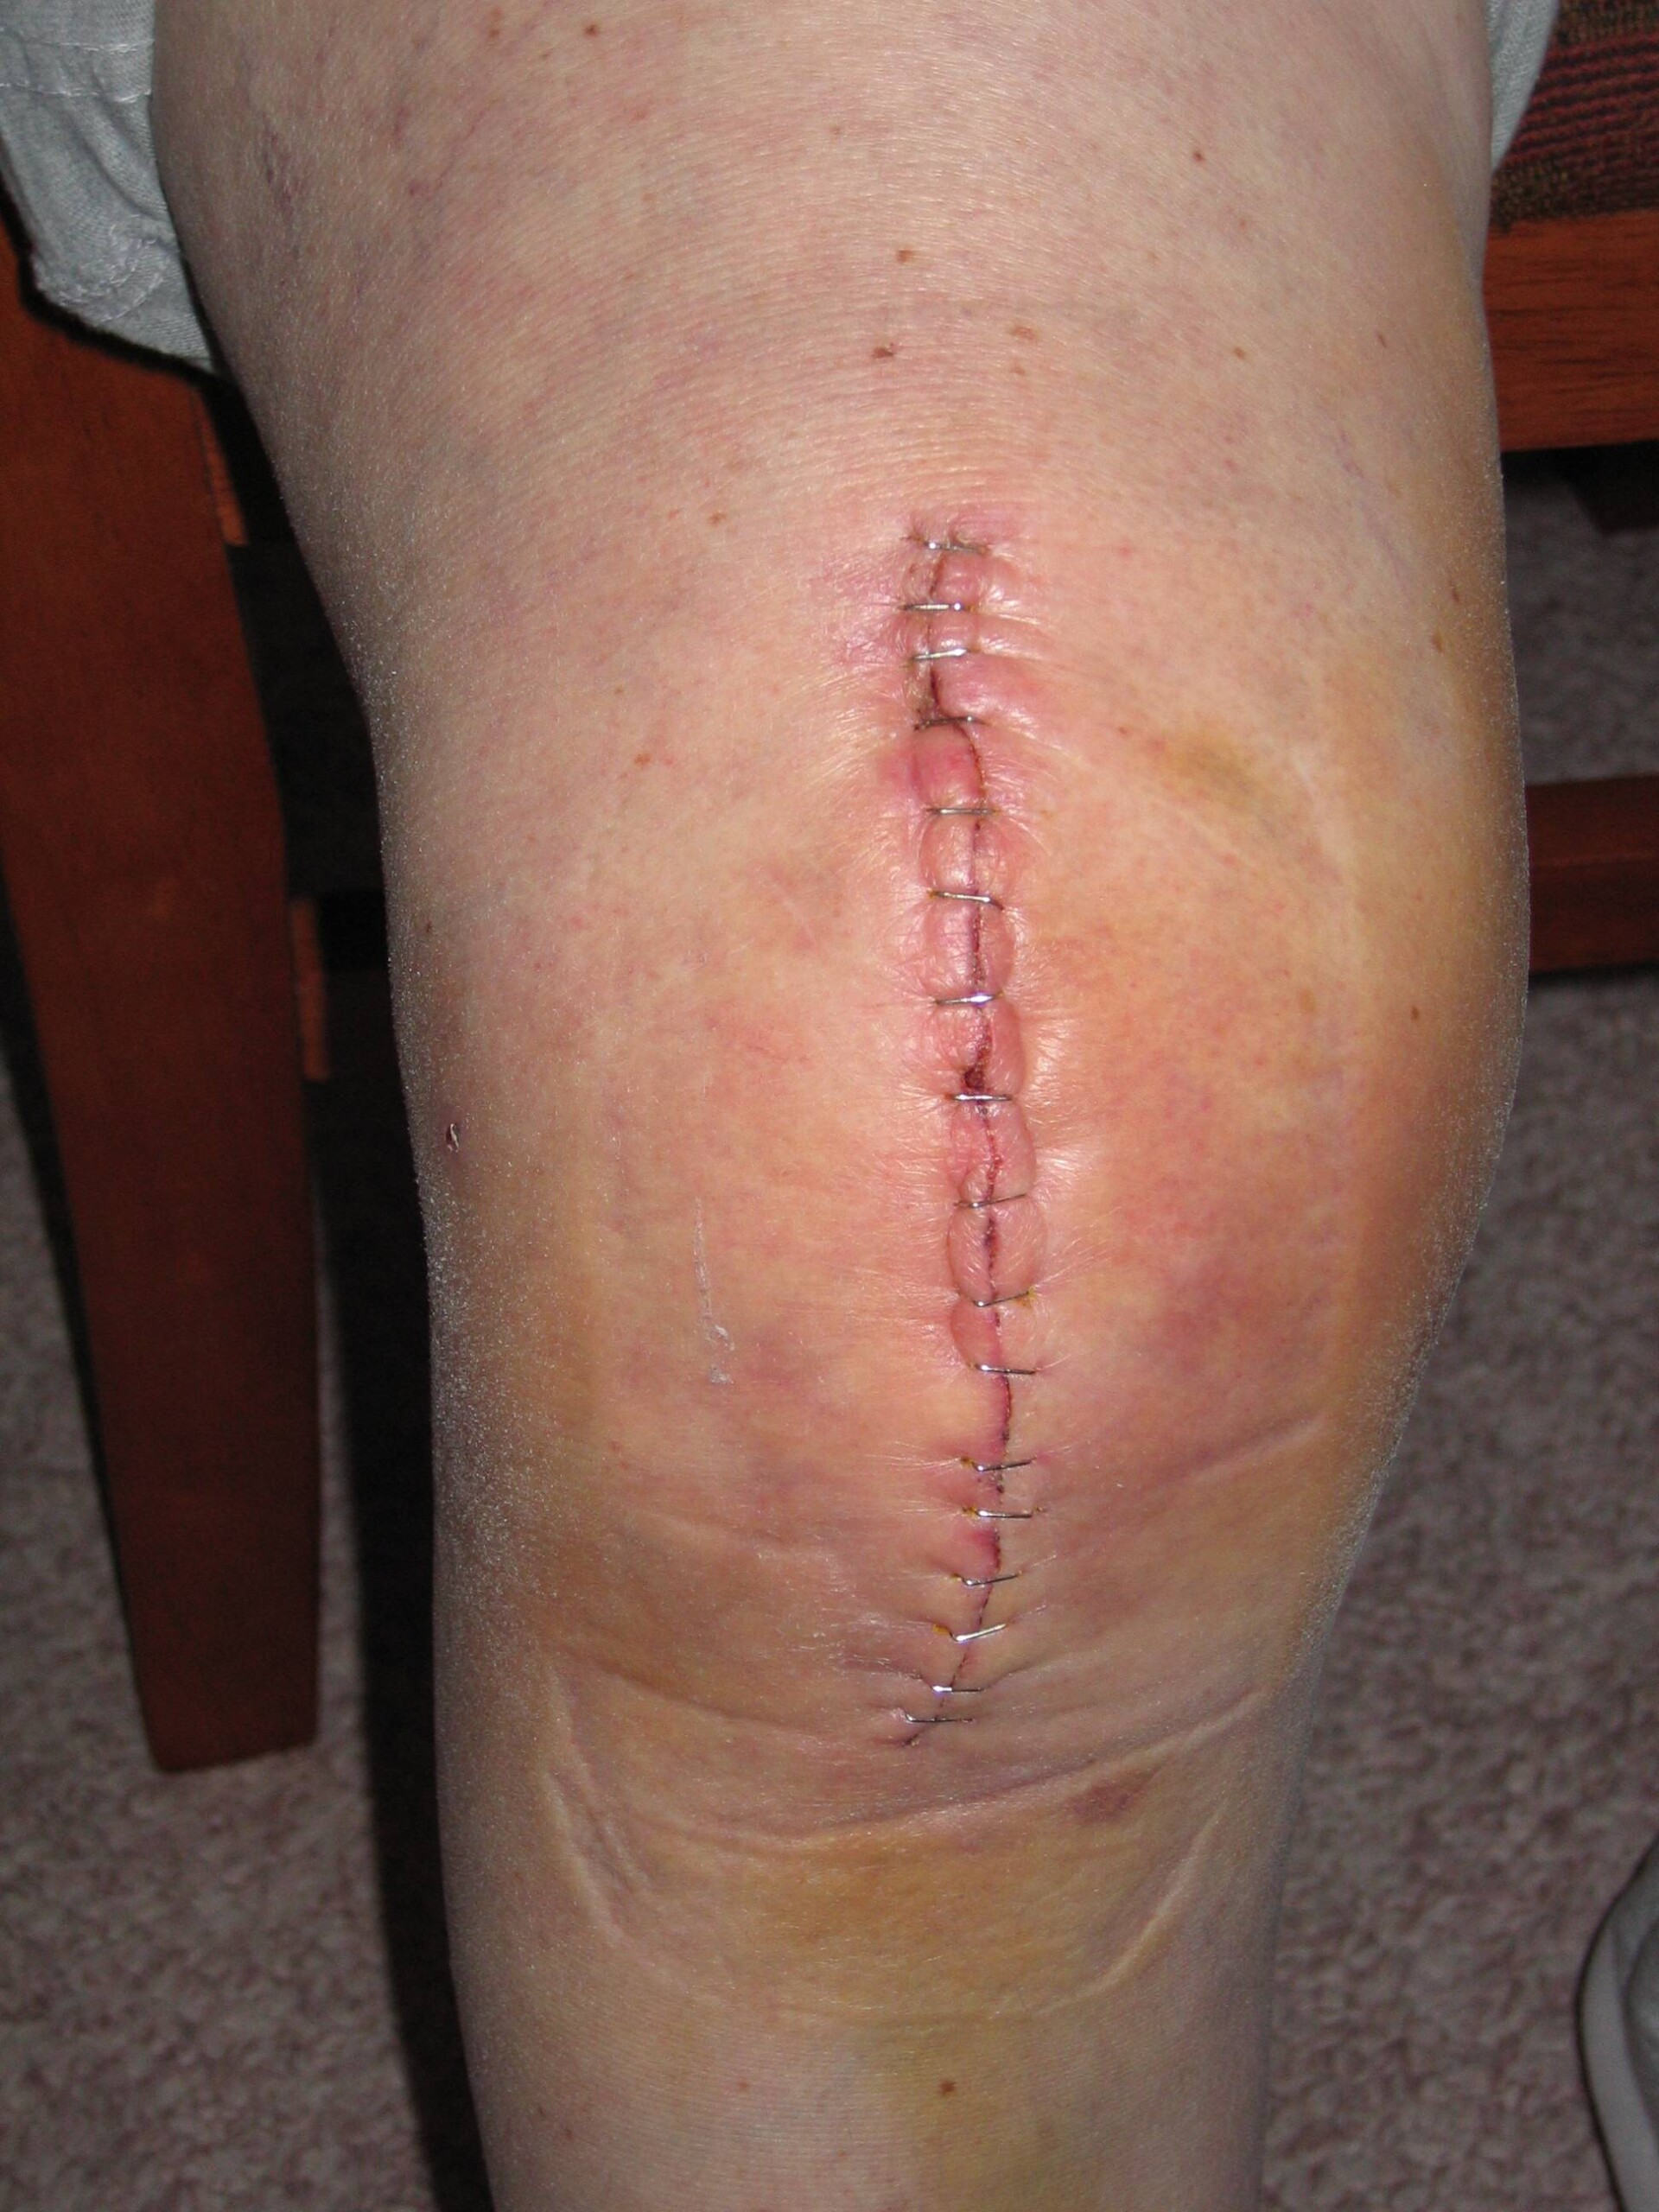 Is Leg Swelling After Knee Replacement Always DVT?